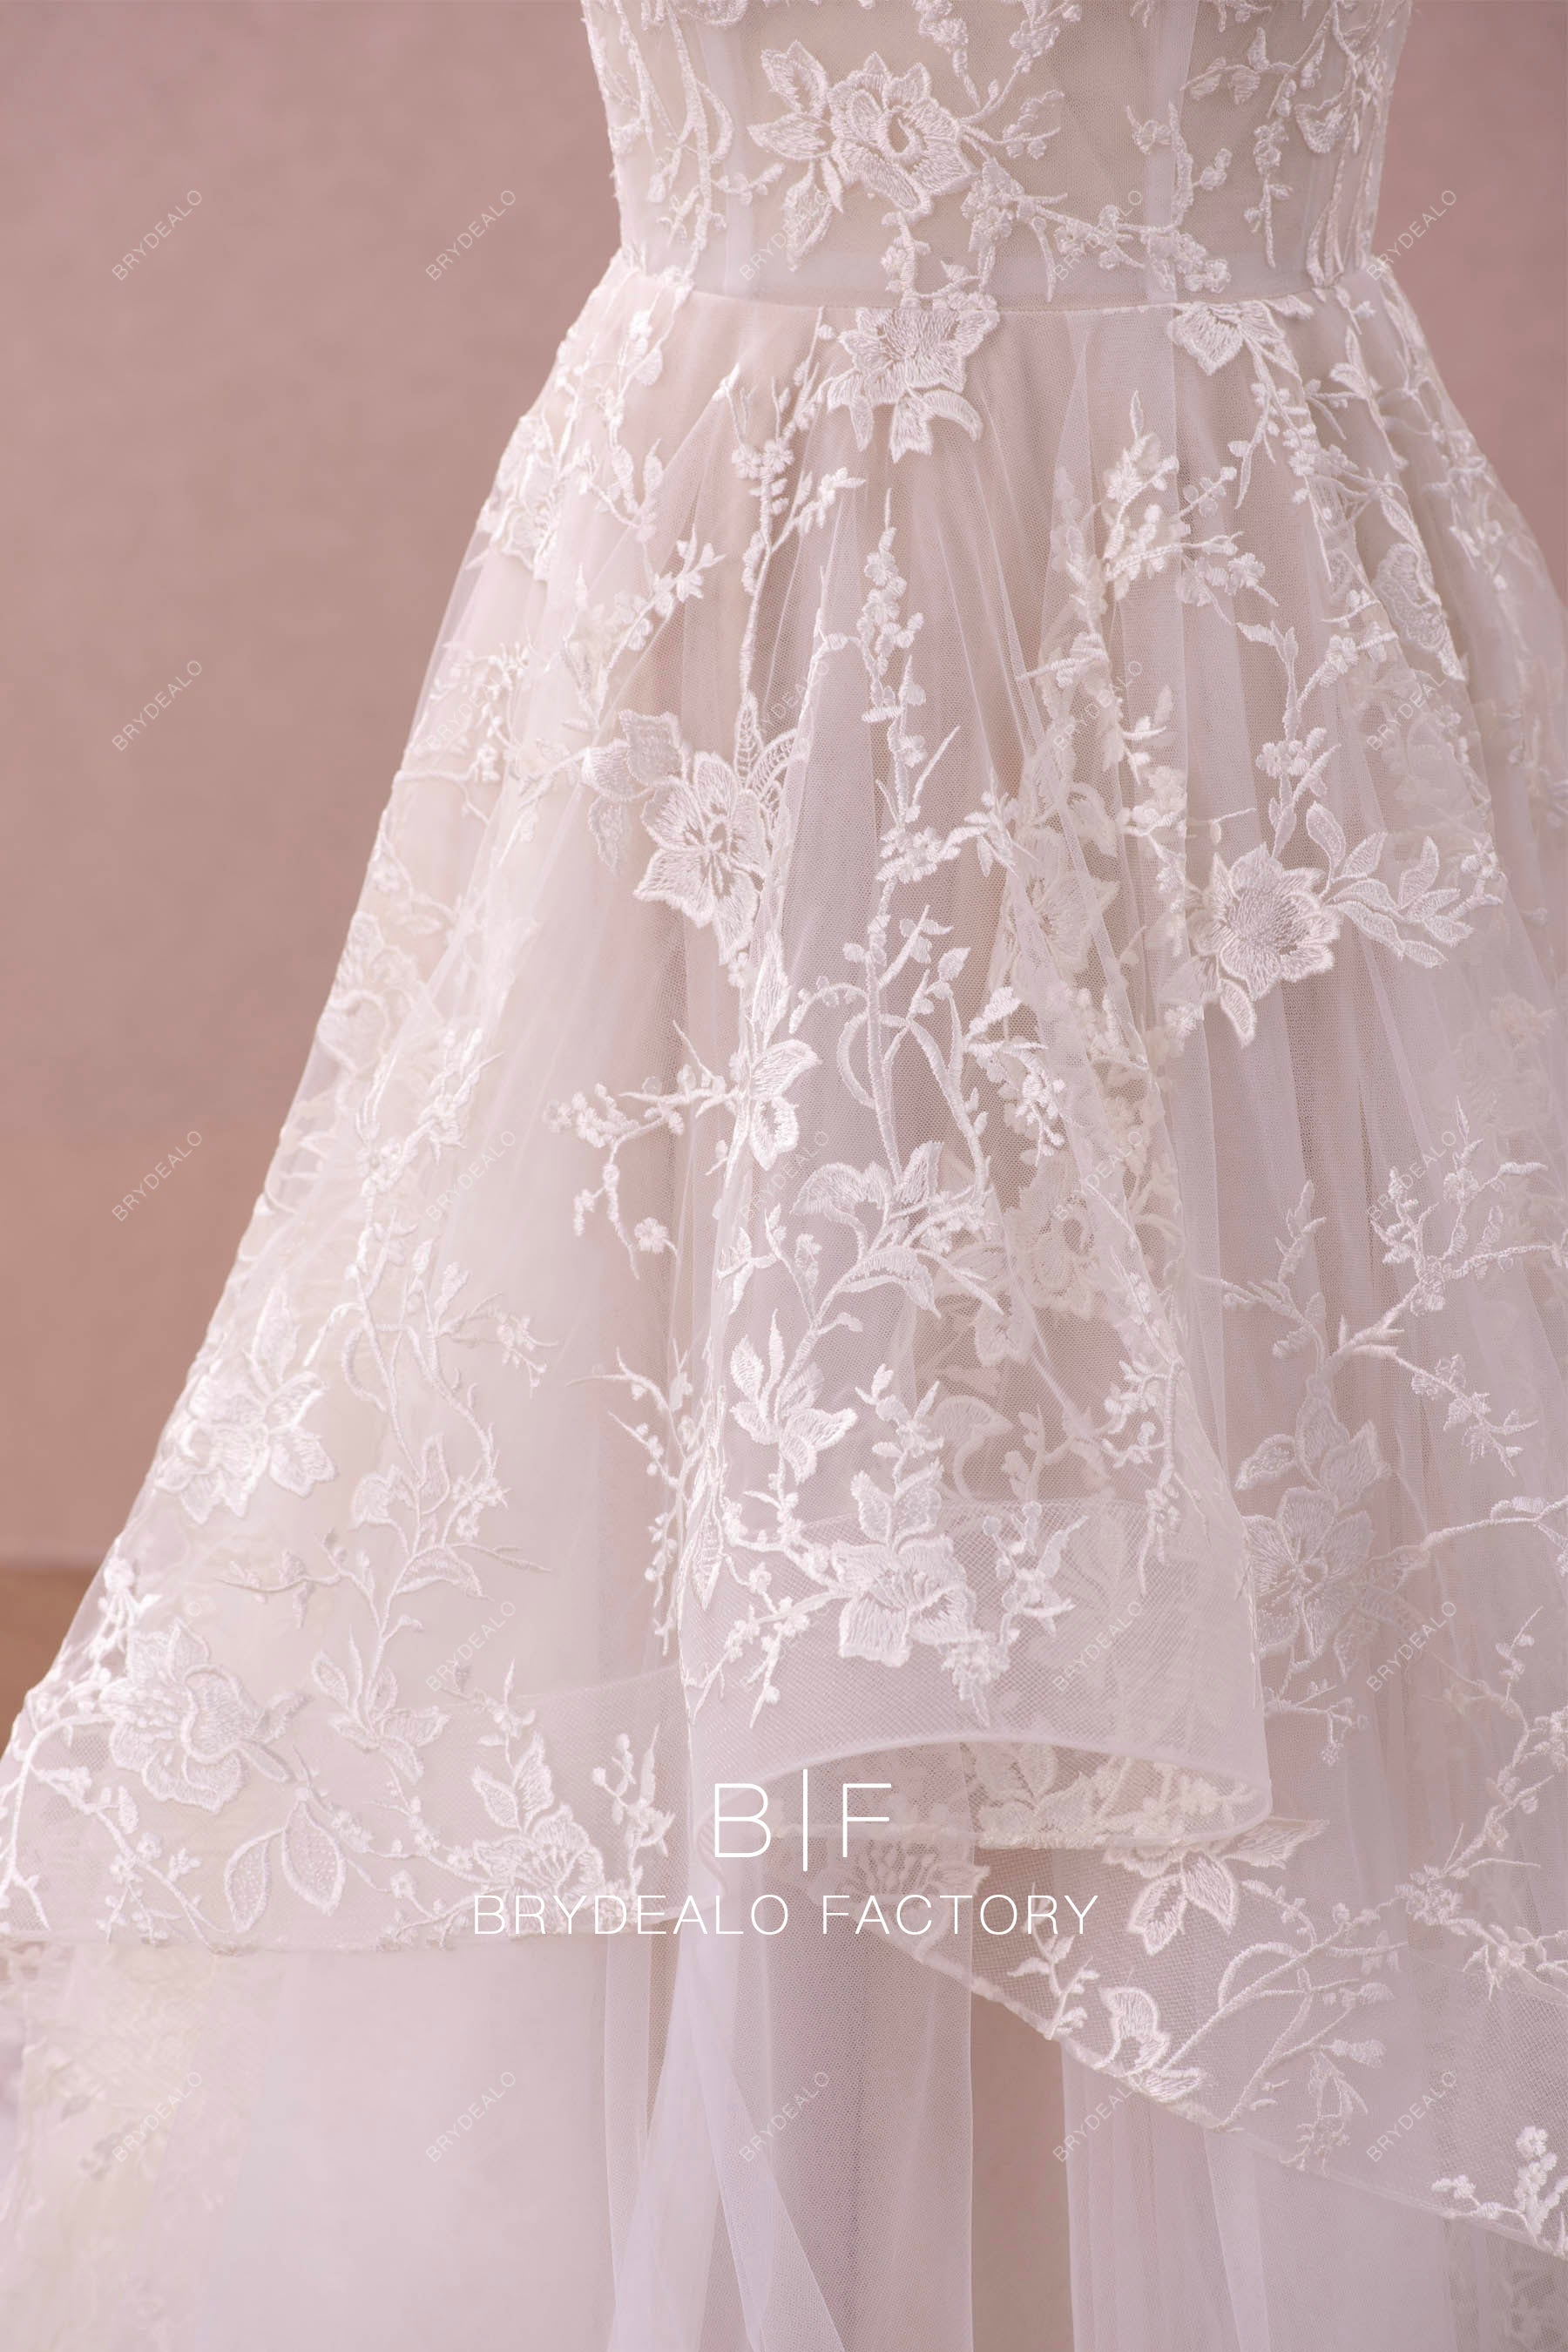 horsehair lace casual wedding dress